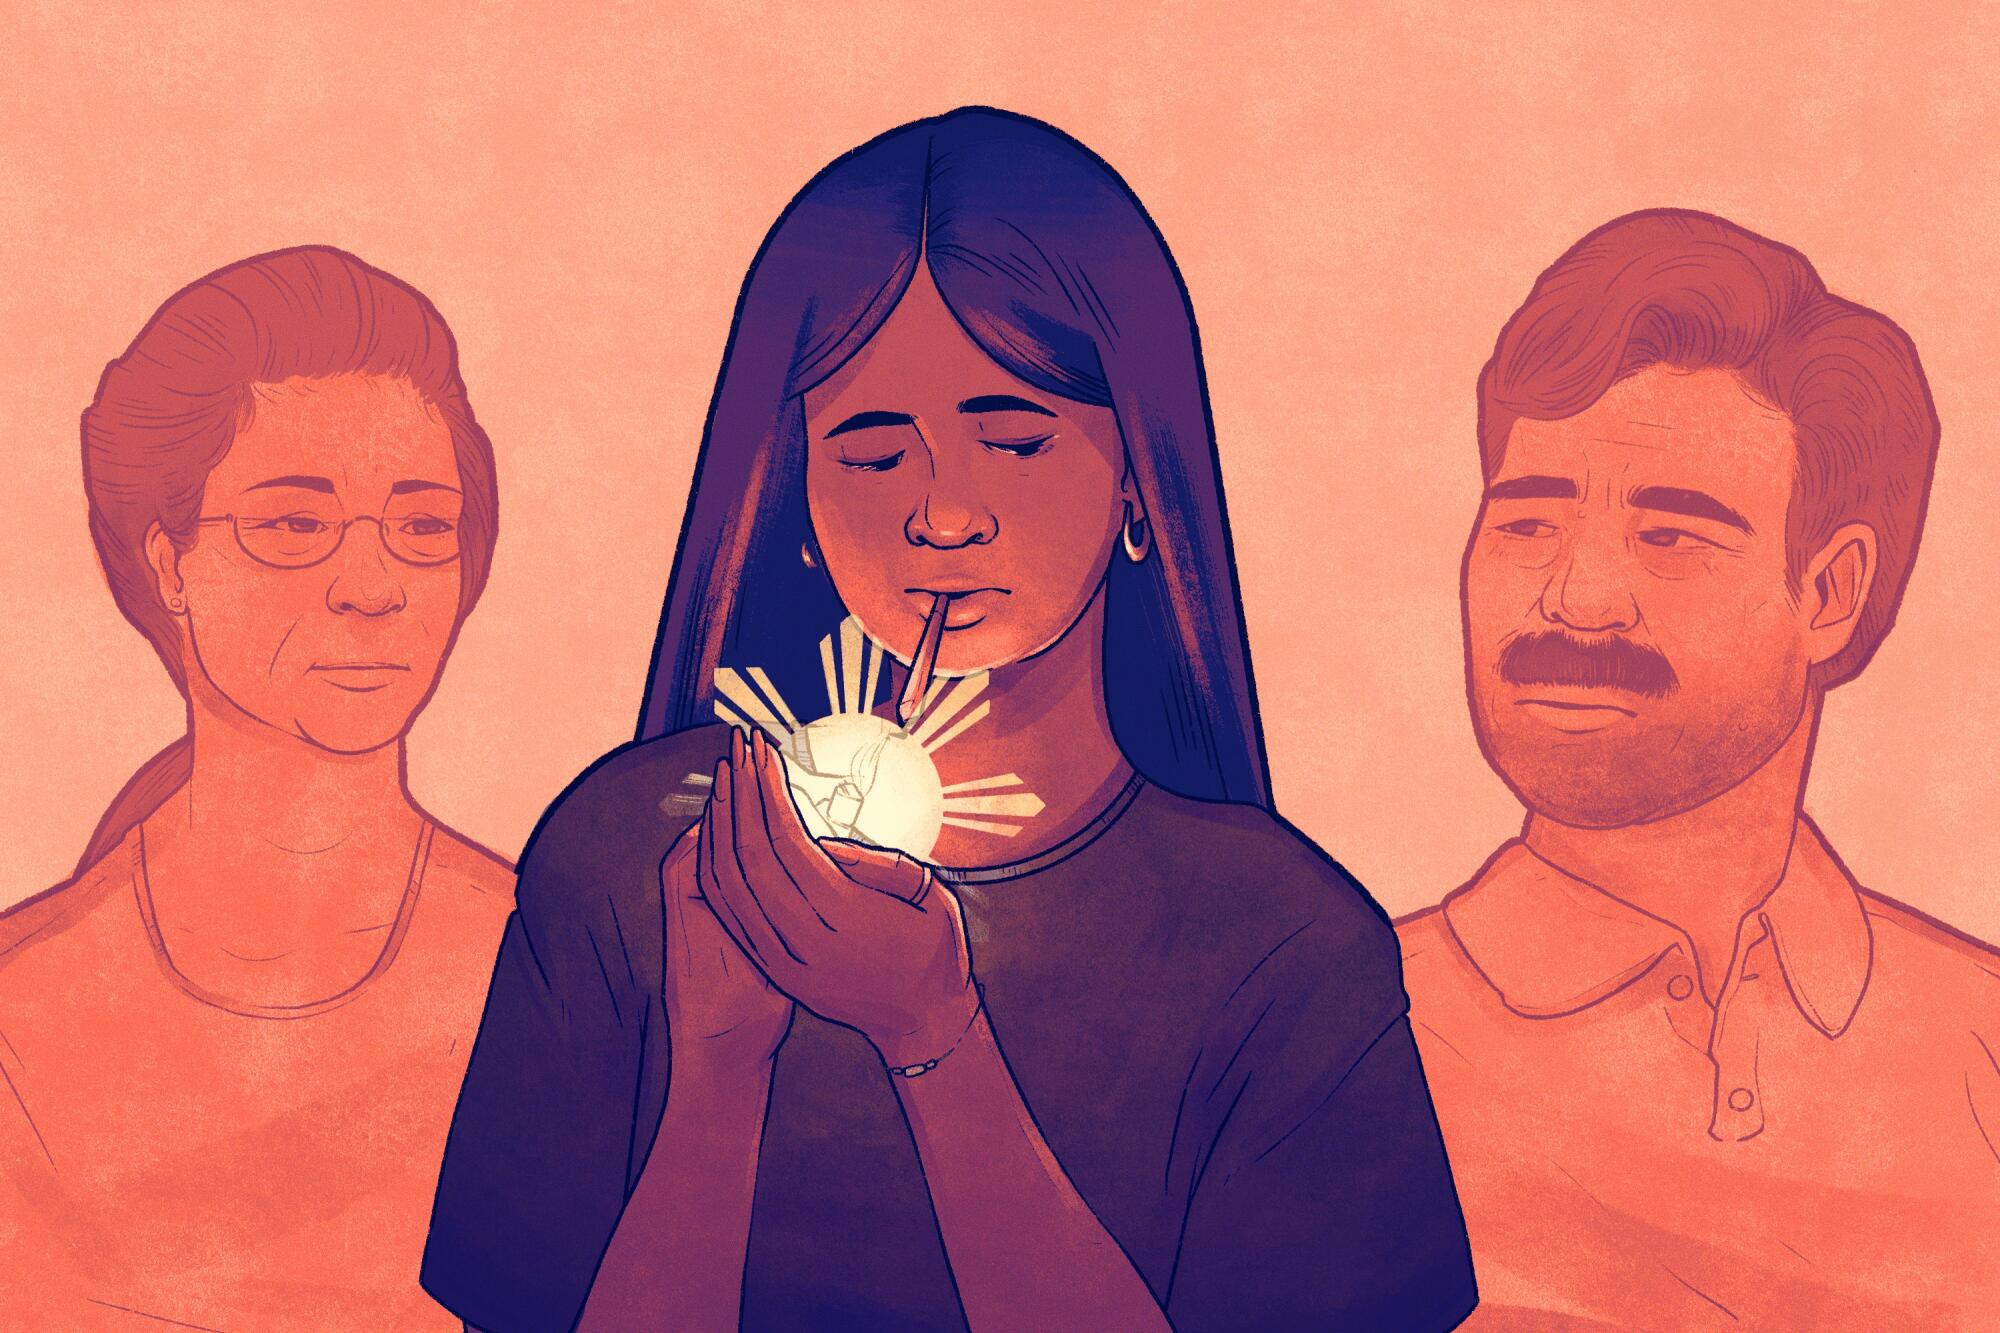 Illustration of a young woman lighting a joint with two parents behind. Glow from lighter resembles flag of the Philippines.